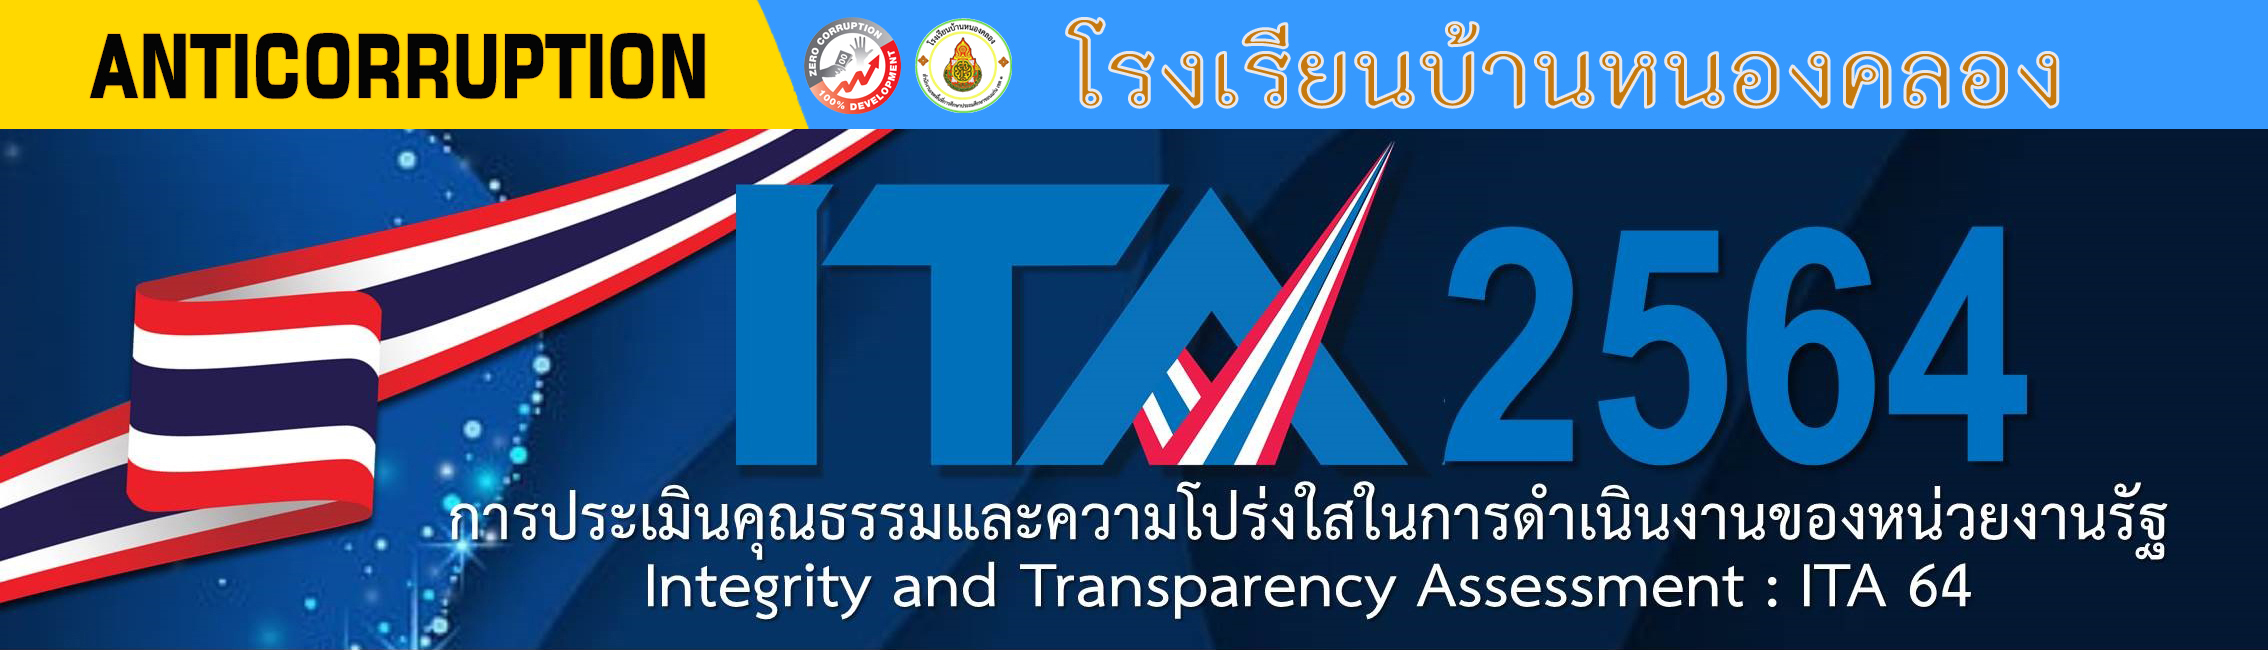 Integrity and Transparency Assessment : ITA